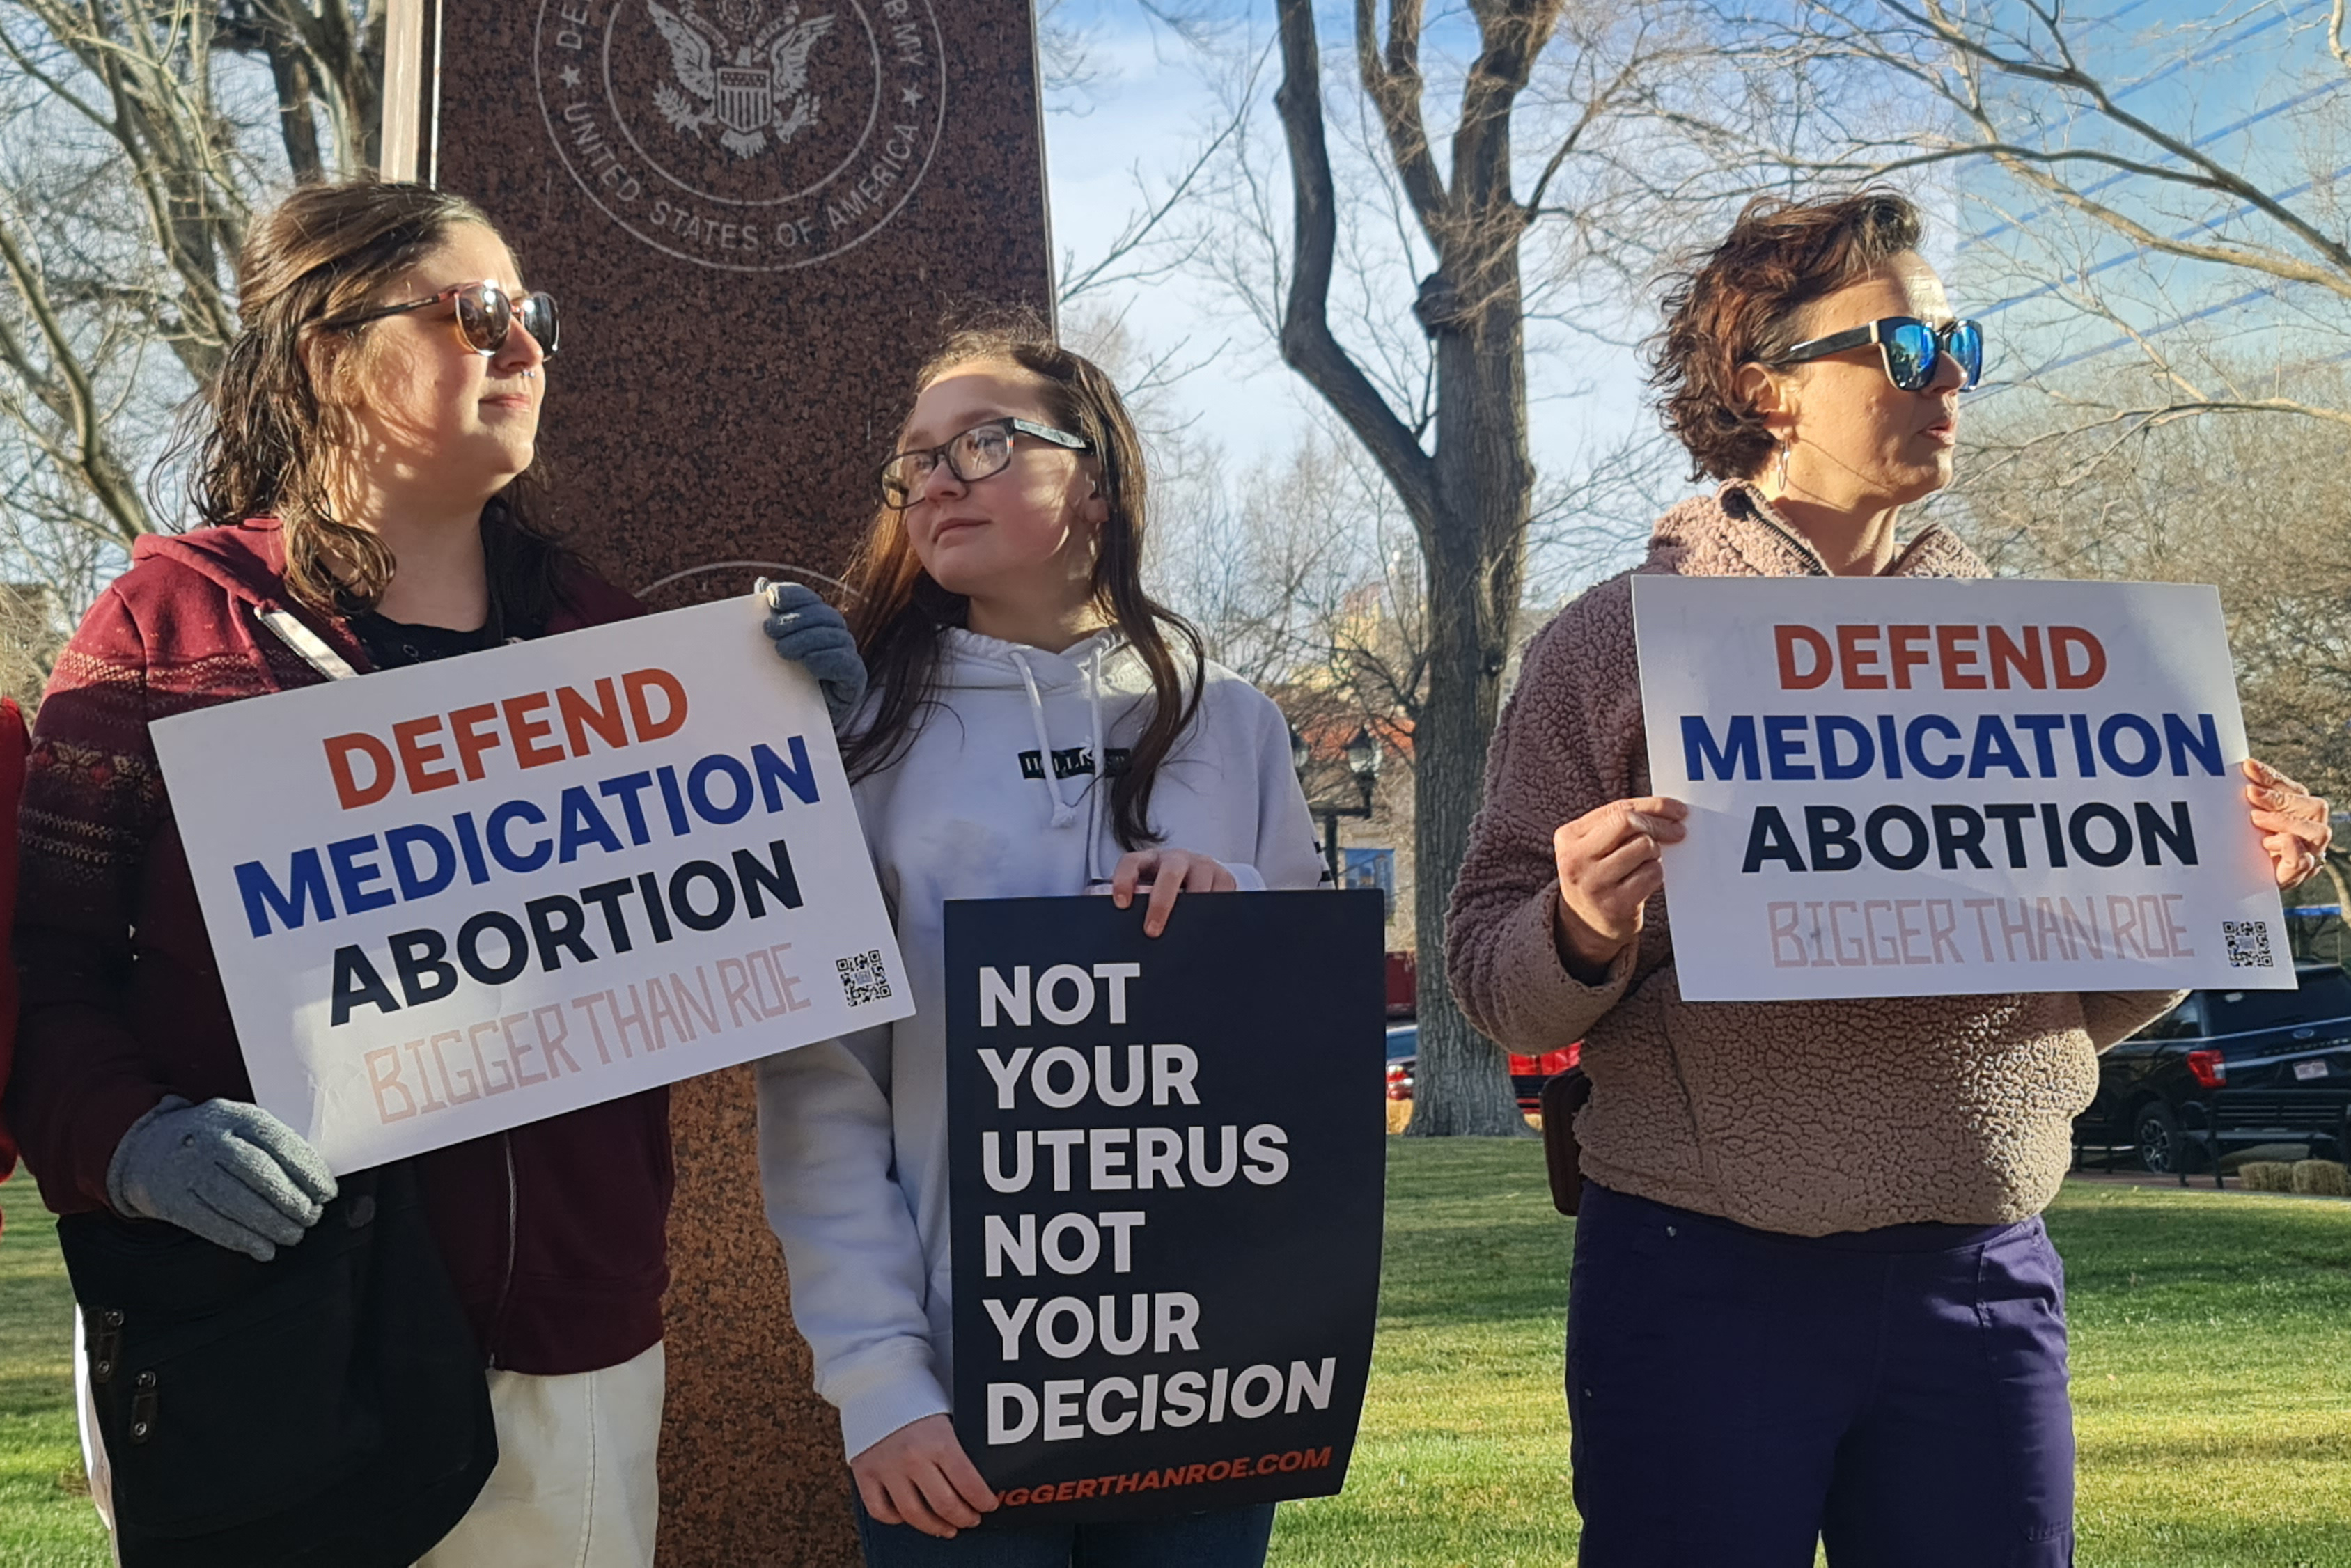 Three abortion rights advocates stand with signs reading “Defend medication abortion” and “Not your uterus not your decision.”